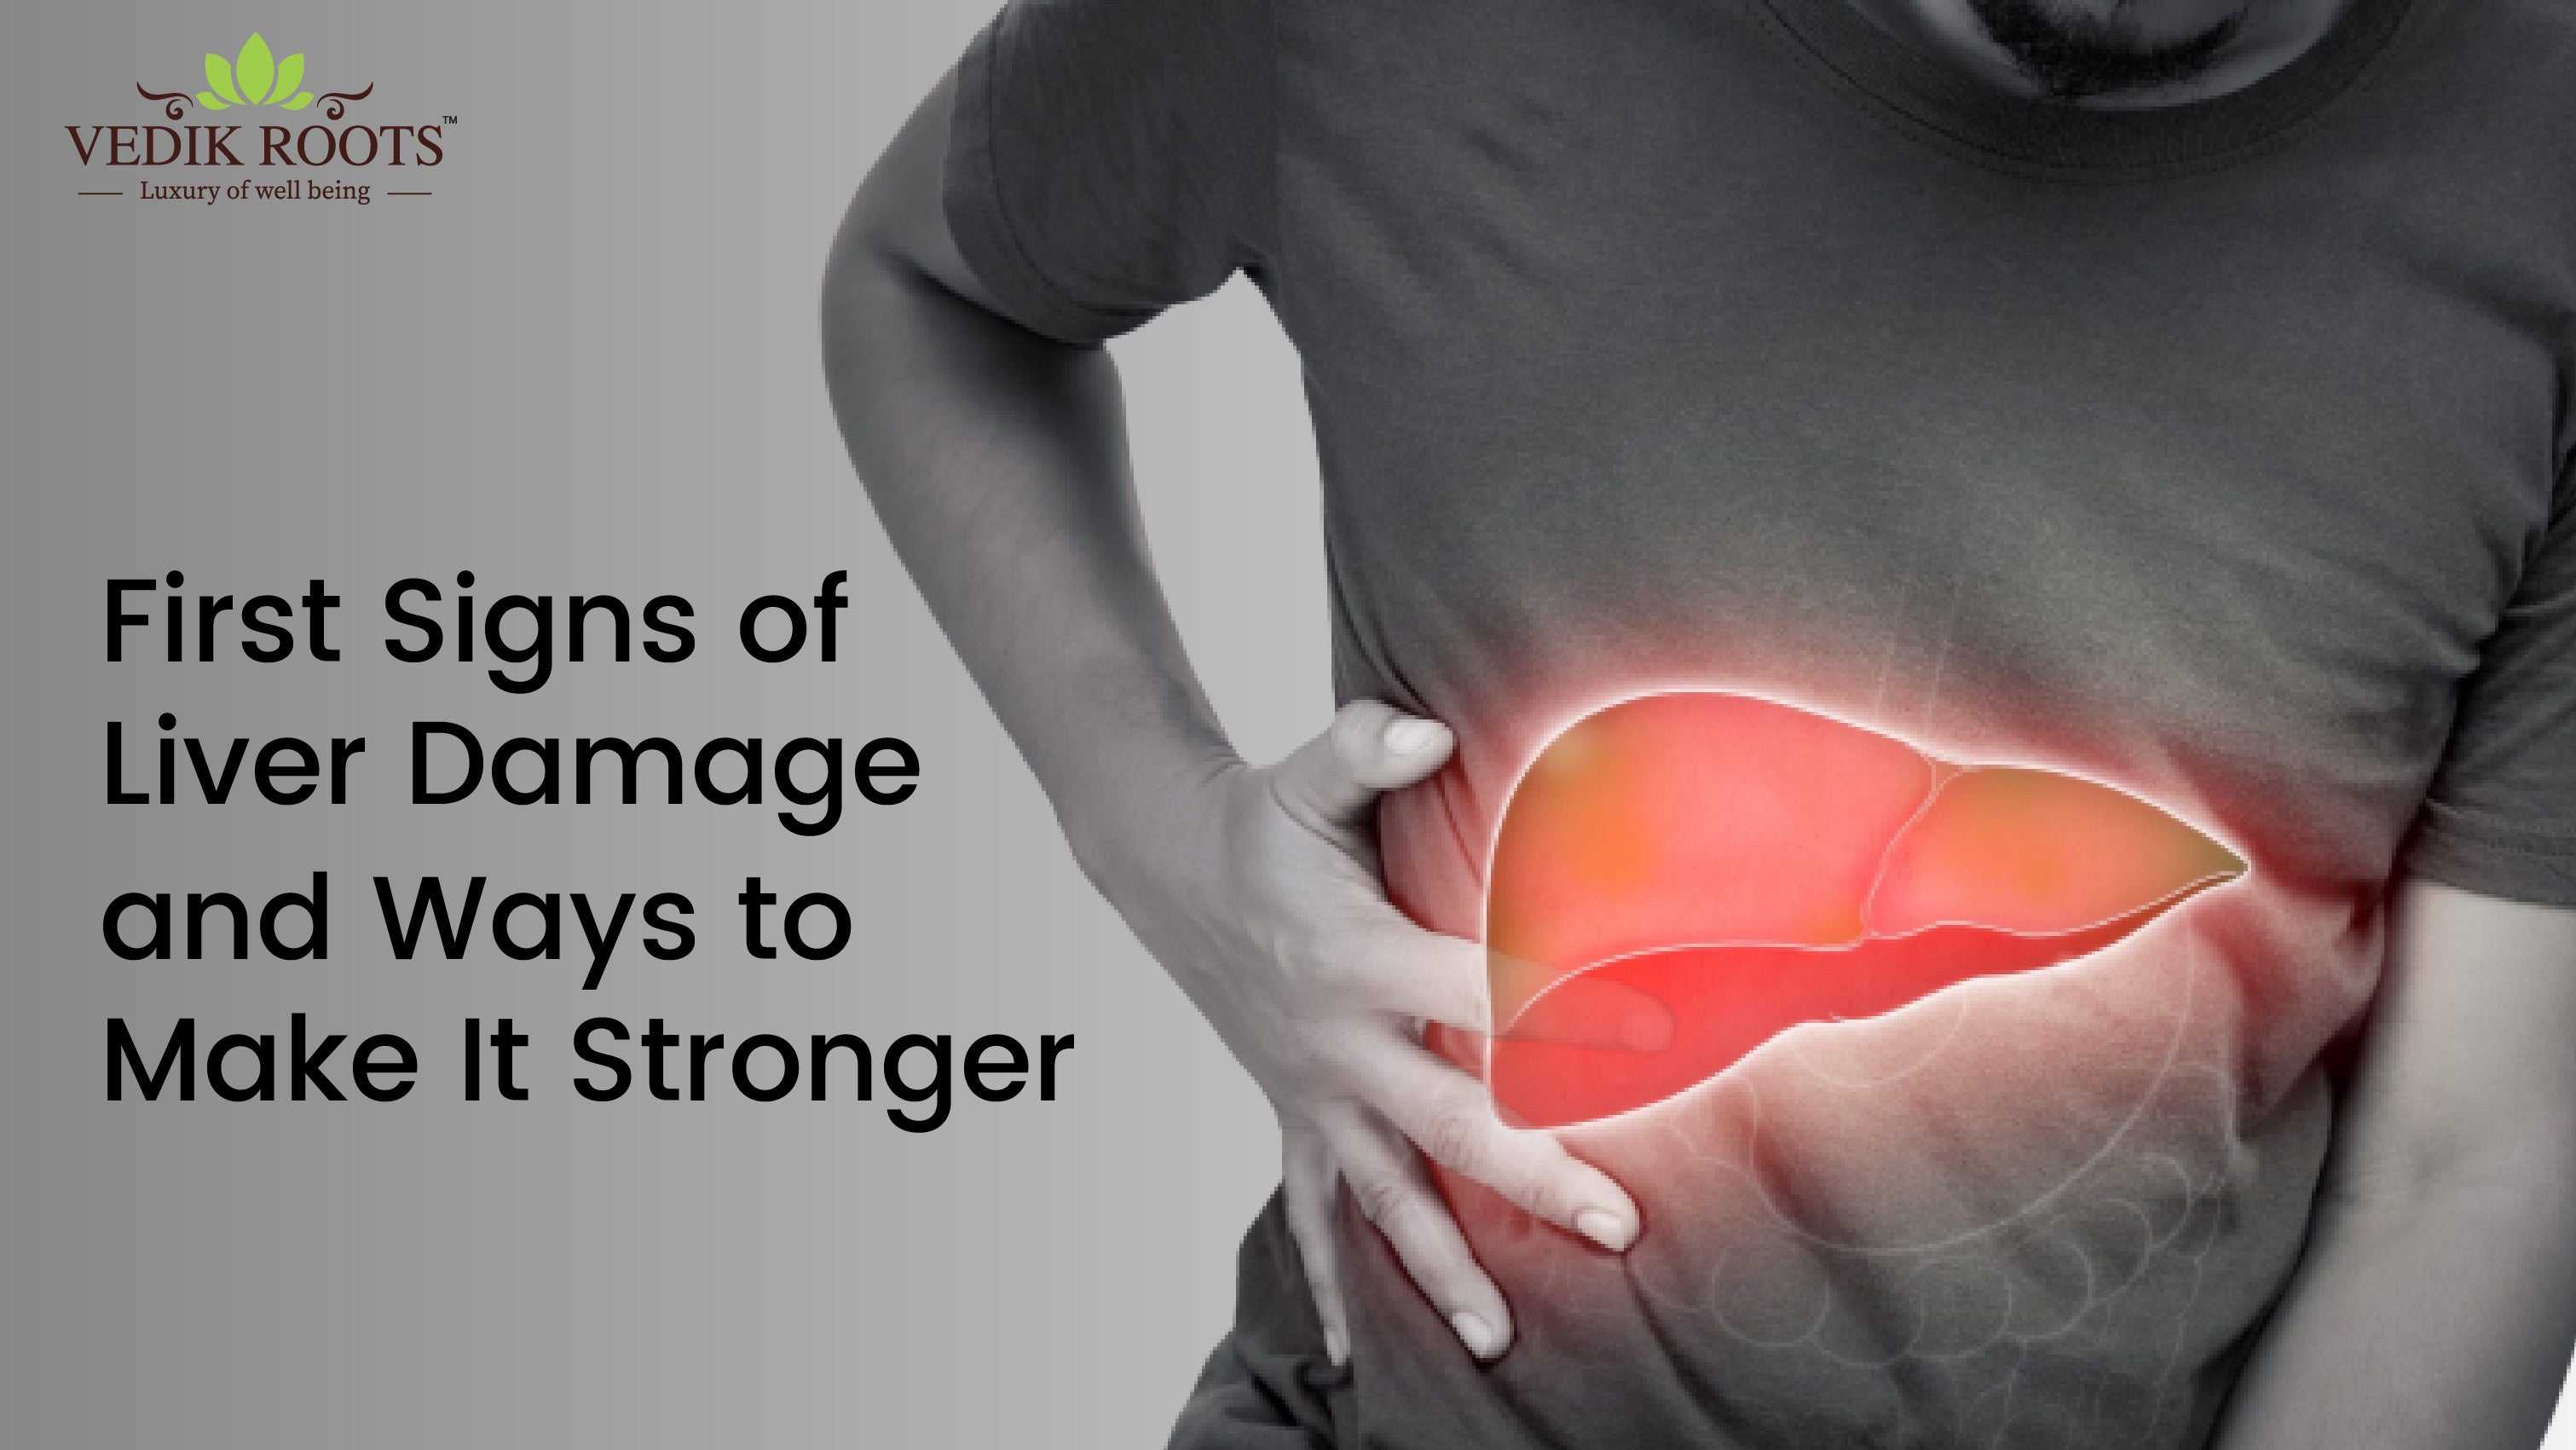 First Signs of Liver Damage and Ways to Make It Stronger